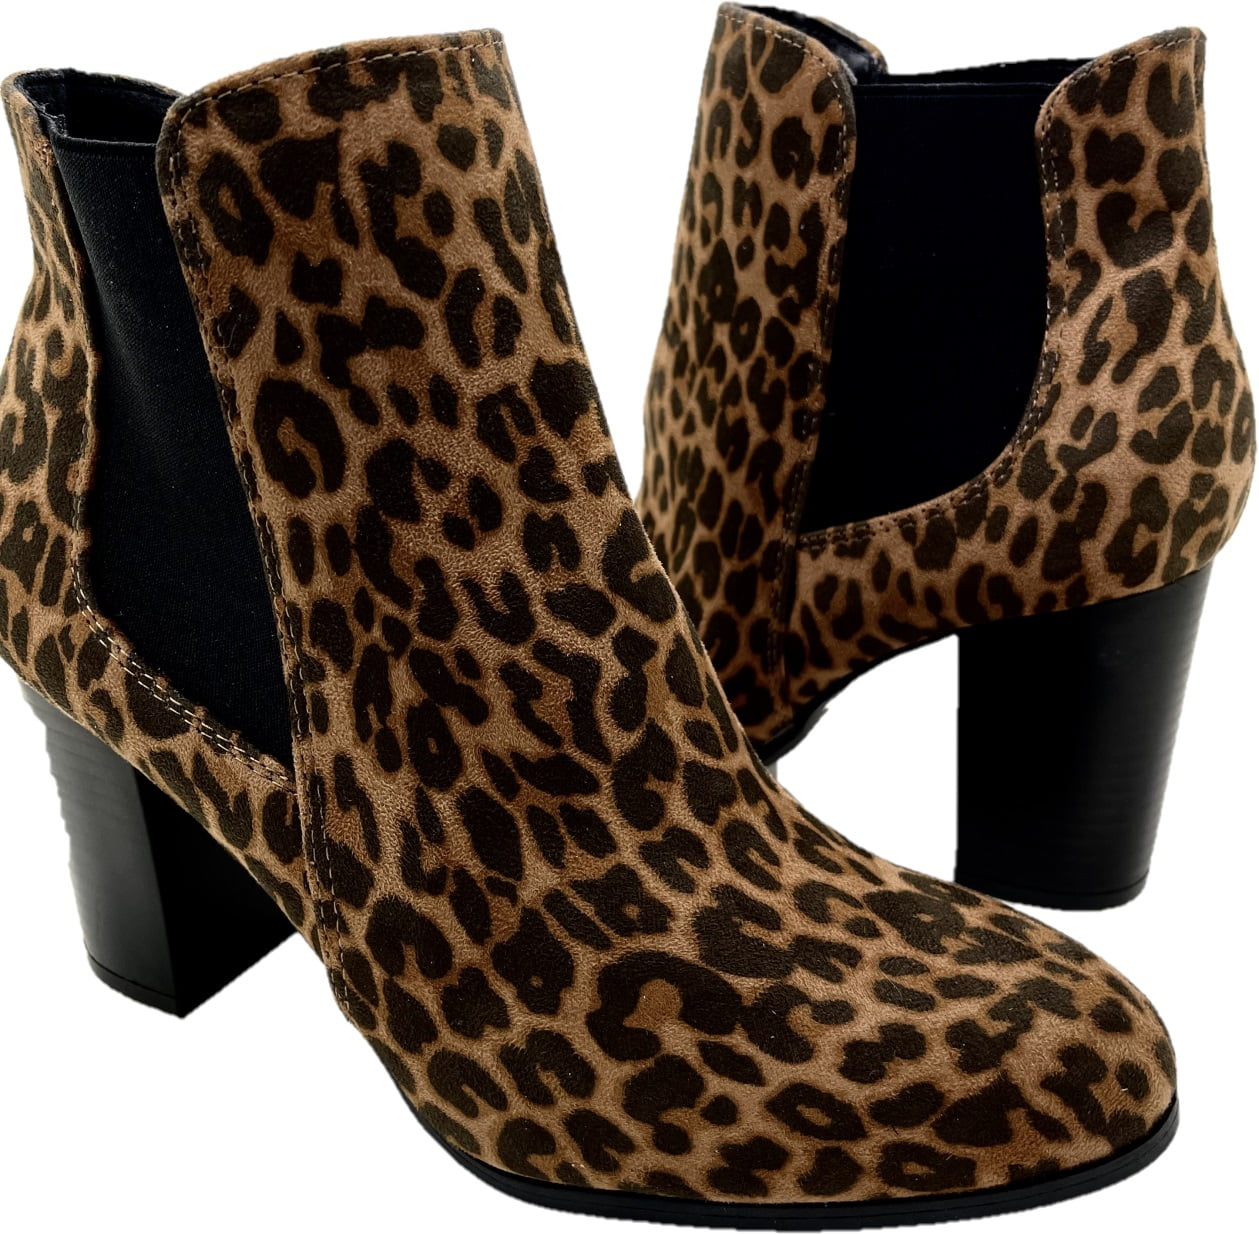 Women Fashion Ankle Boots, Leopard Print Ankle Boot Bootie, Everyday boots,  Ladies Fashion Animal Printed Rainboots, Fall Printed Boots, 